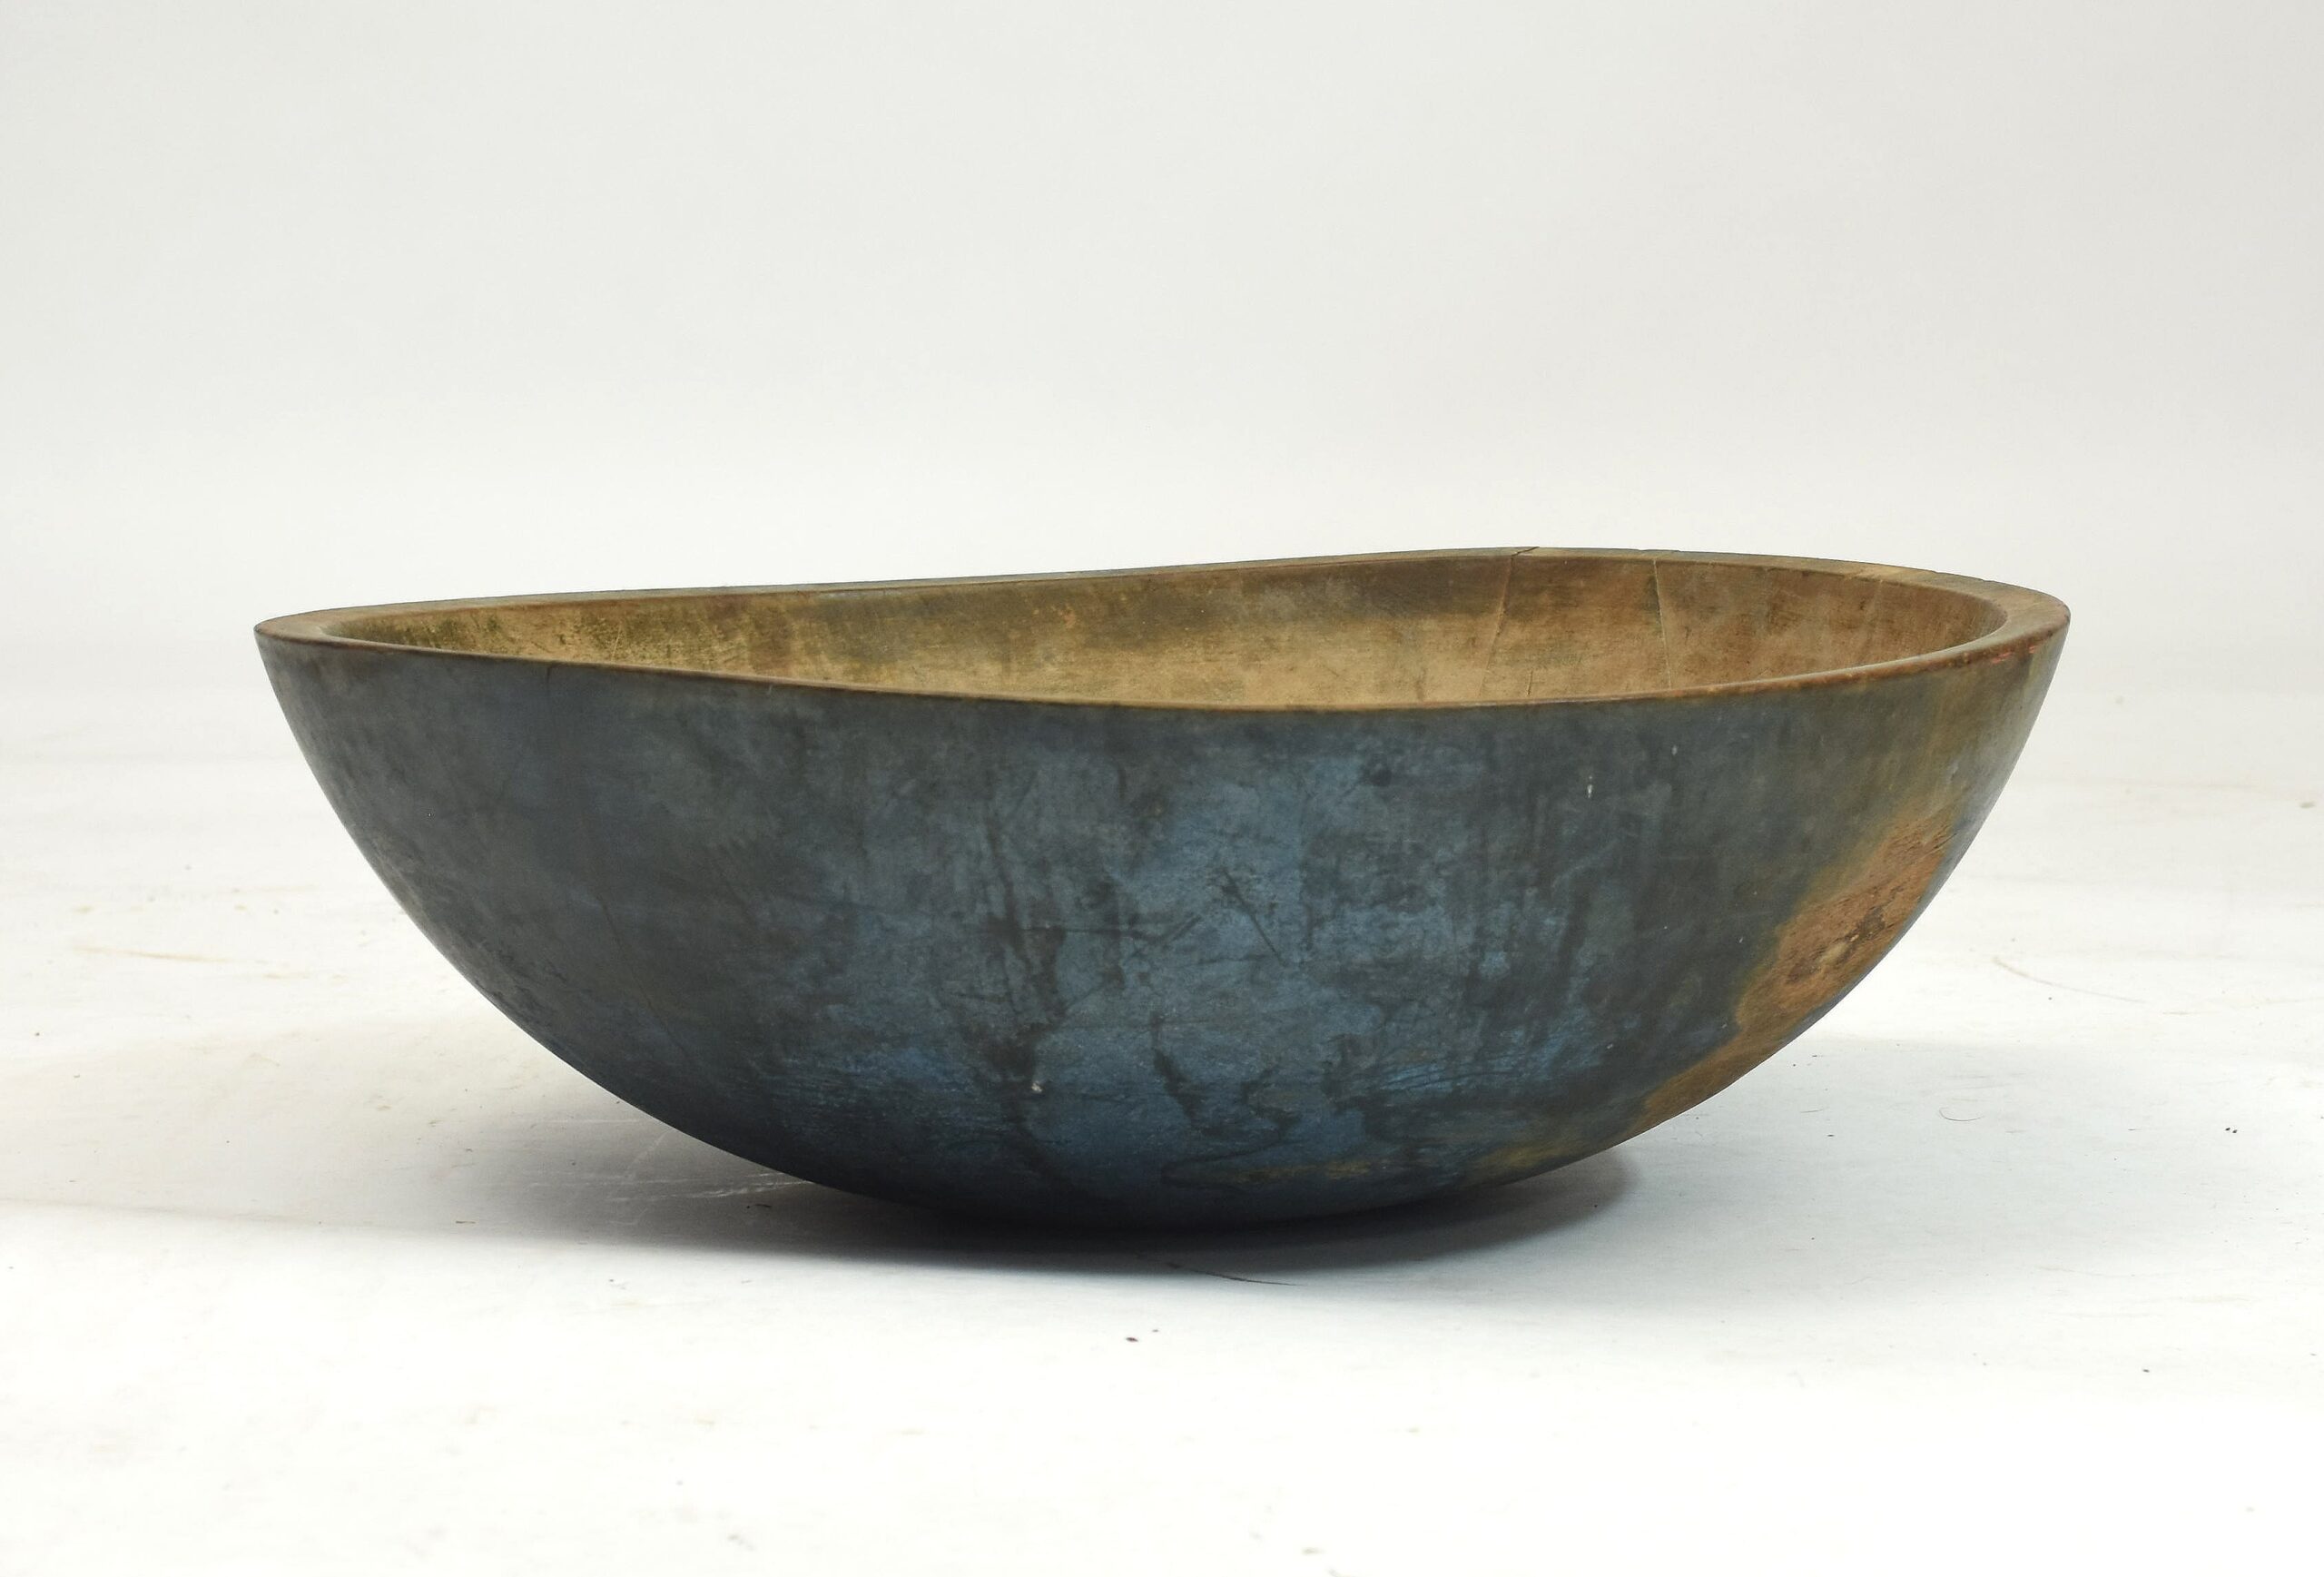 Exceptional 18th/19th C. large round chopping bowl in old blue paint